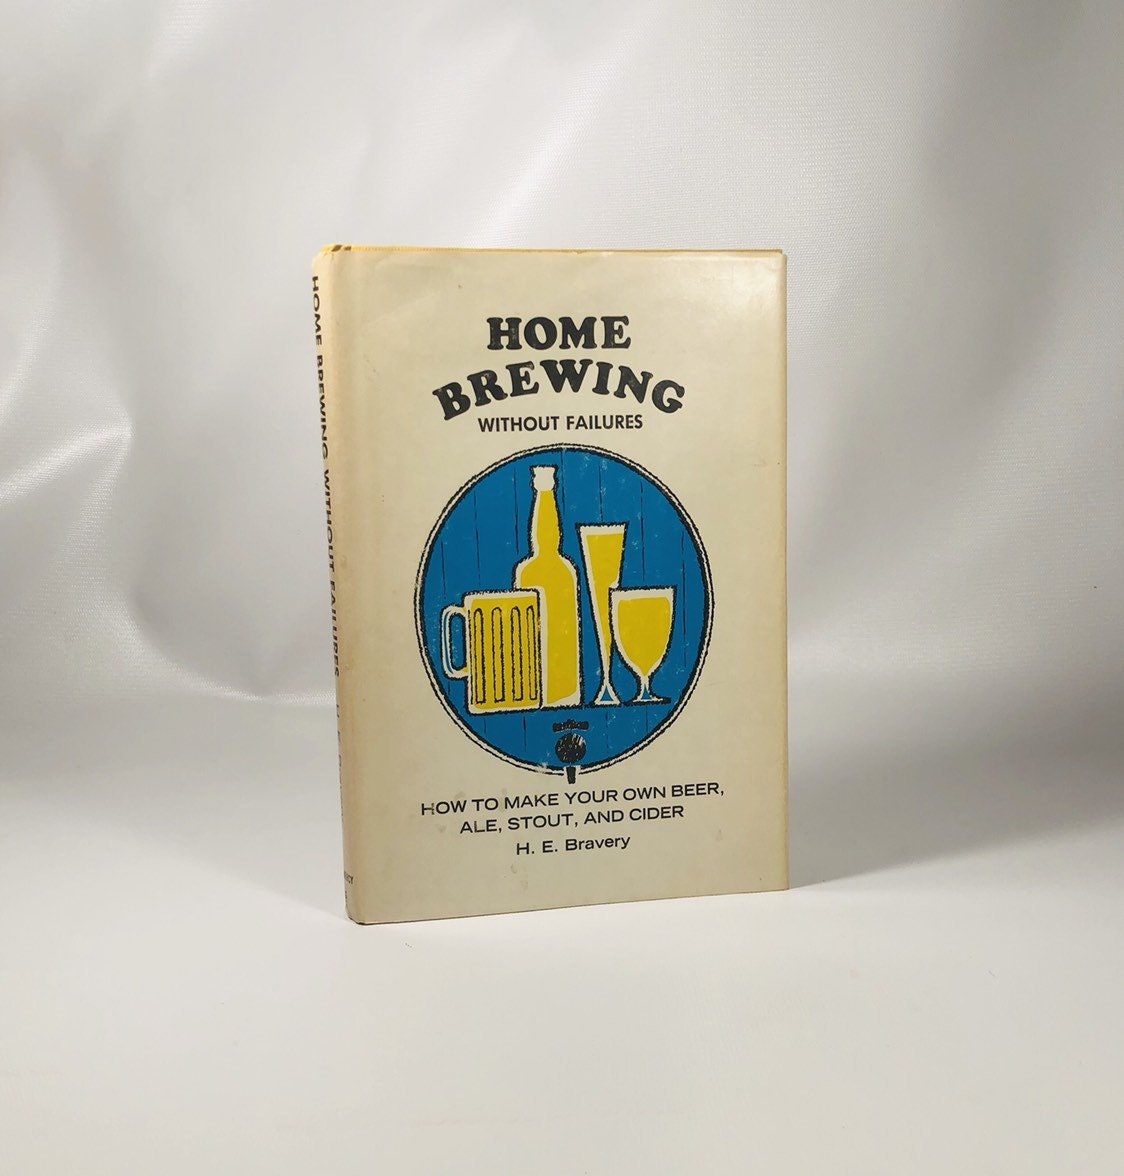 Home Brewing Without Failures by H.E. Bravery 1965 Vintage Book